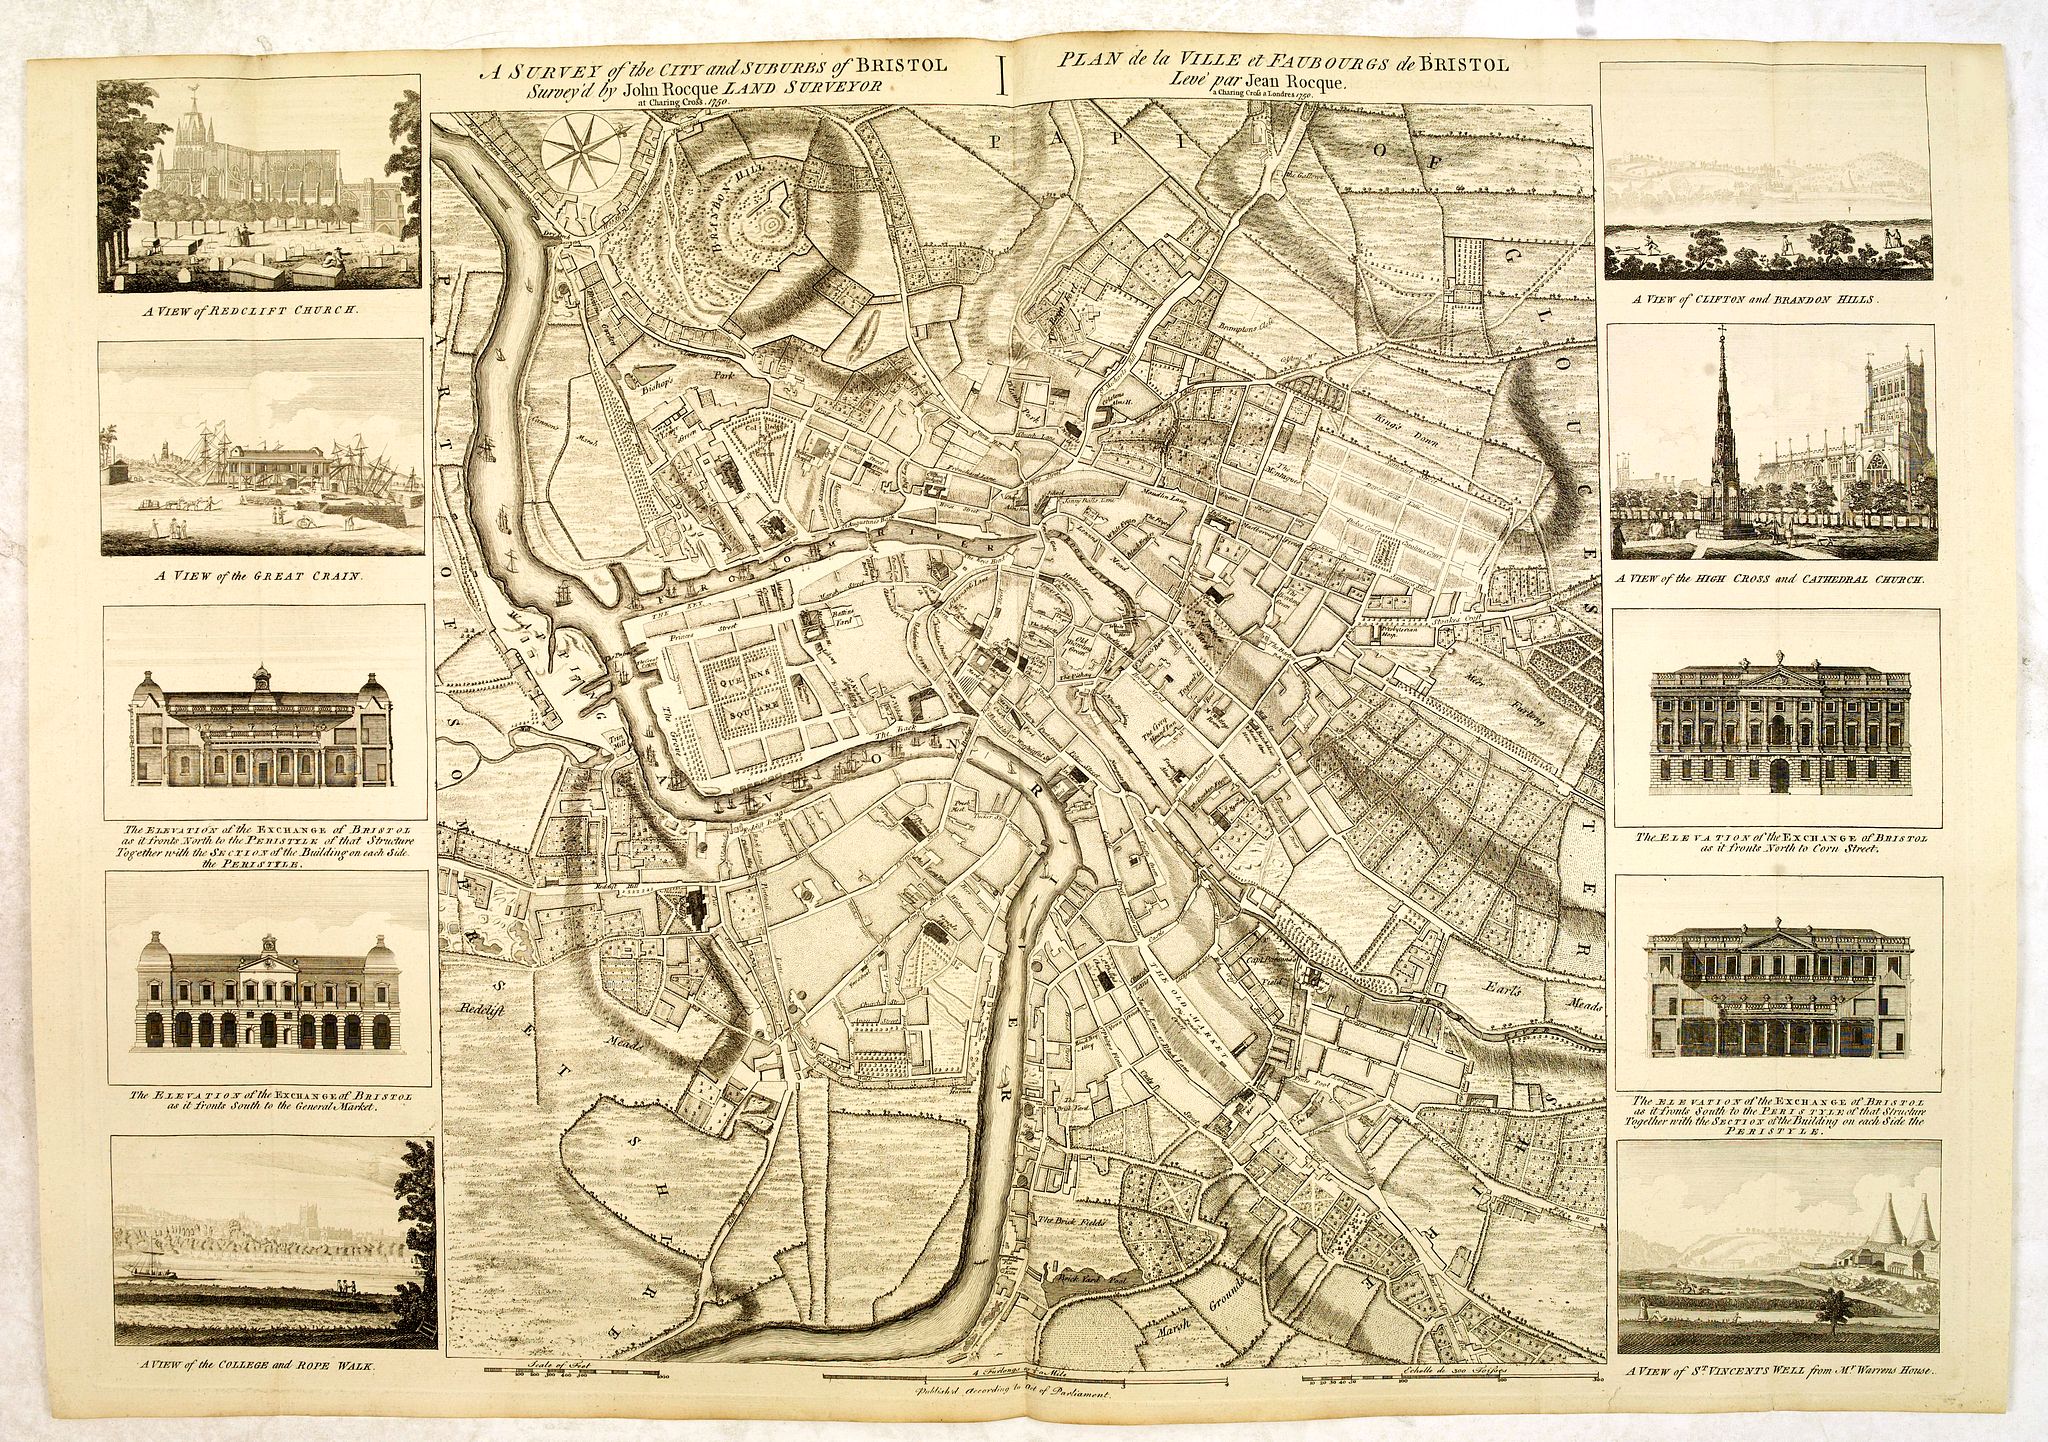 A Survey of the City and Suburbs of Bristol Survey'd by John Rocque ...